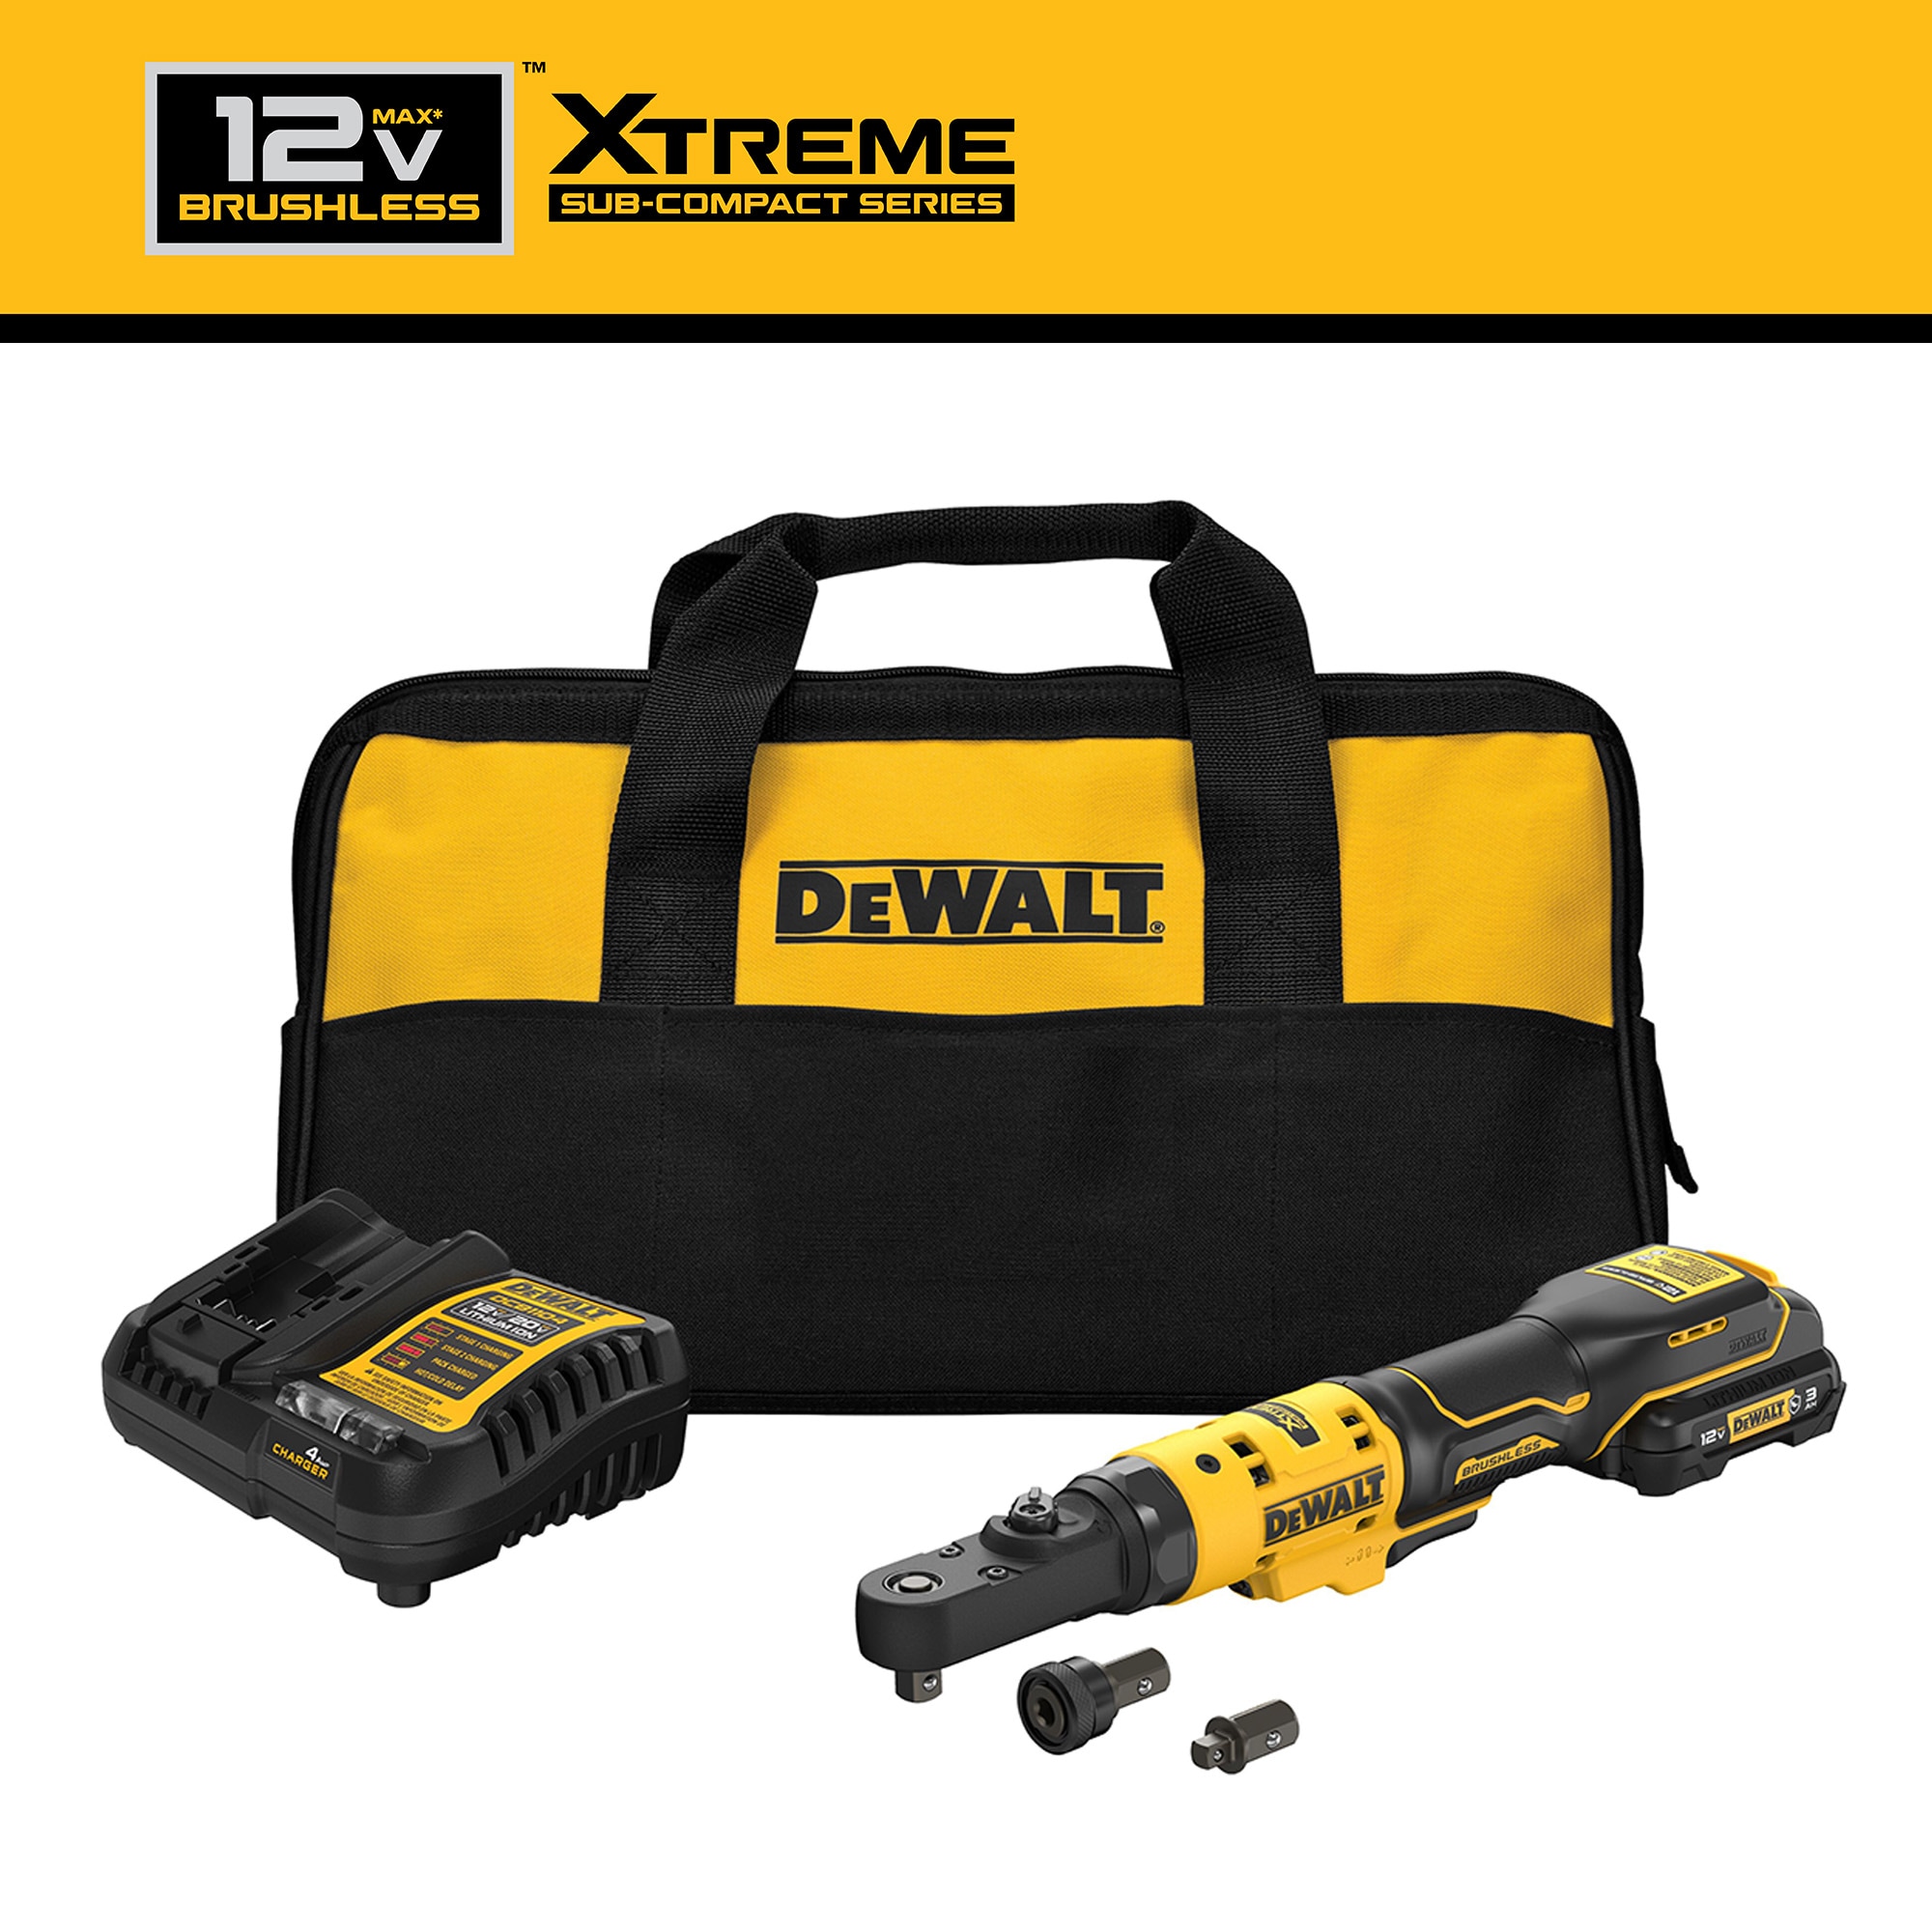 DEWALT XTREME 20-volt Max Variable Speed Brushless 3/8-in Drive